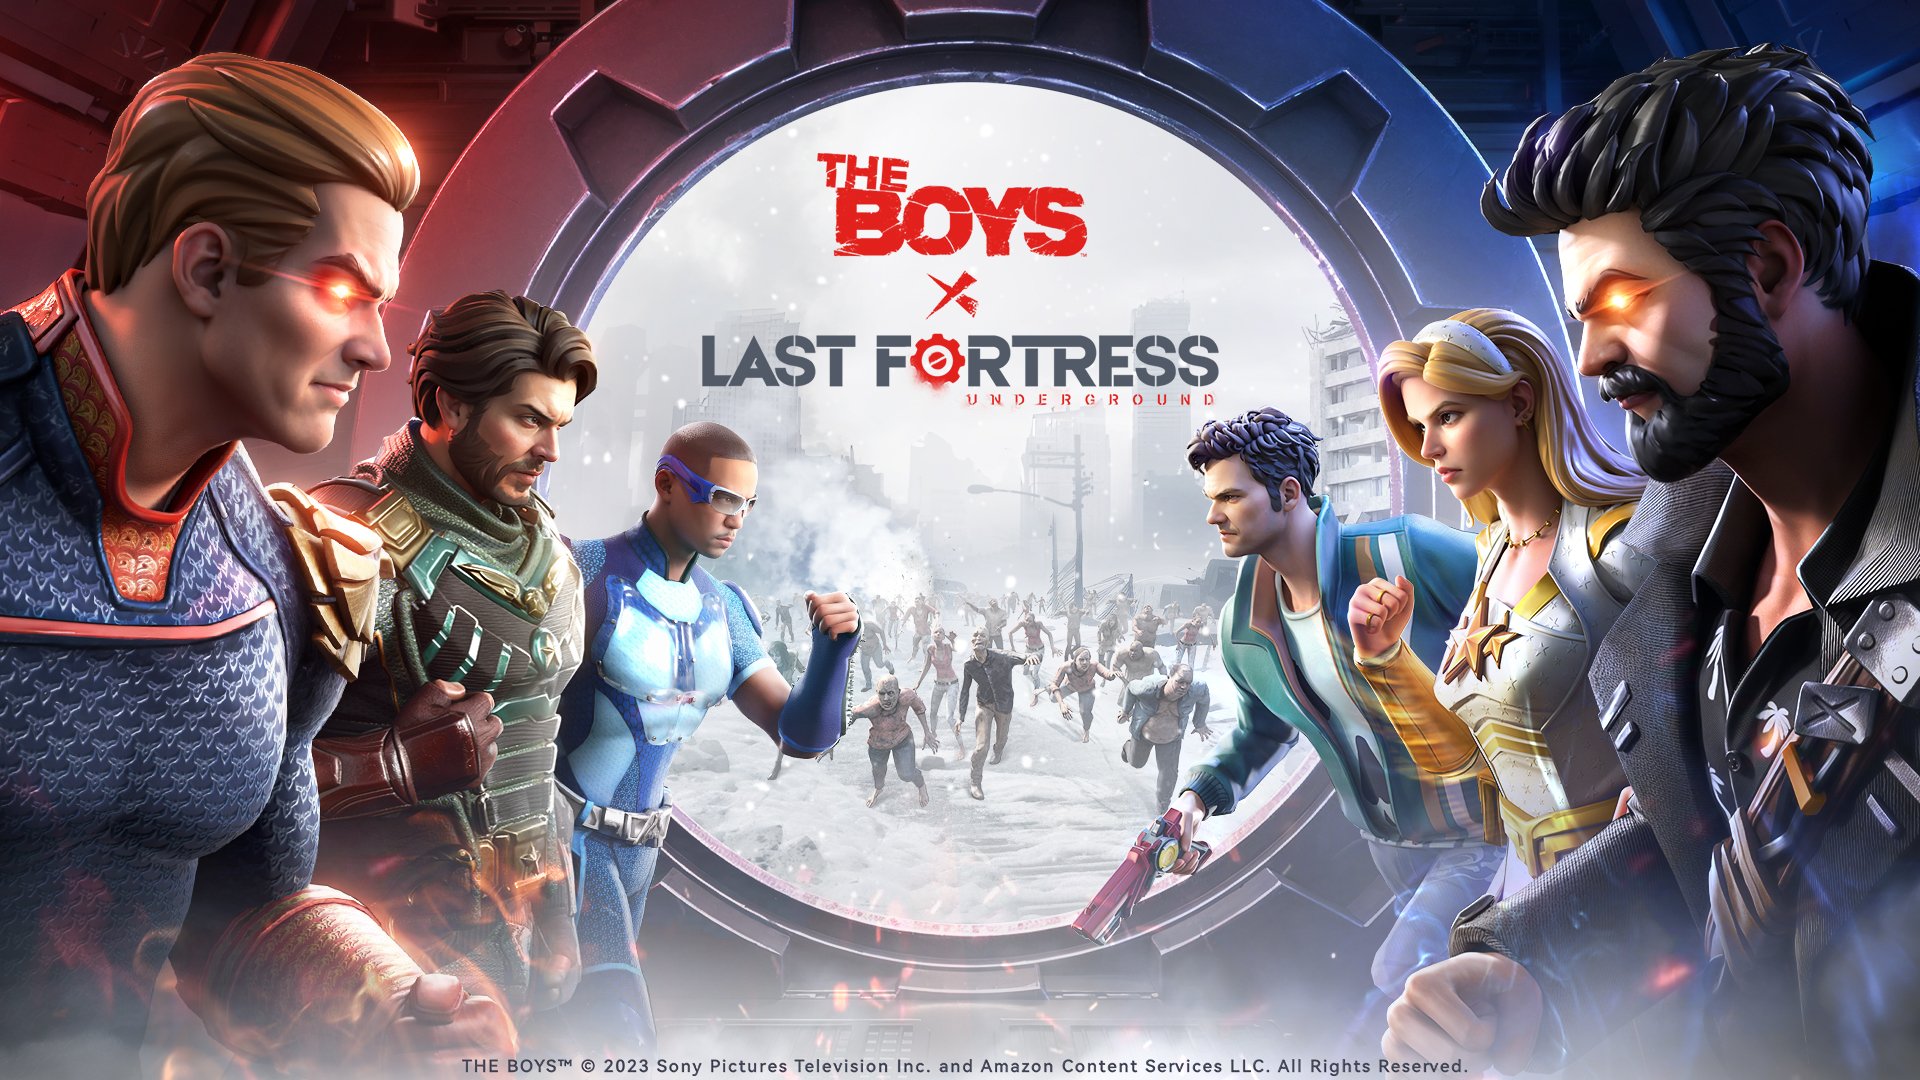 The Boys’ Homelander, Soldier Boy, and A-Train in the New Last Fortress Collab Event